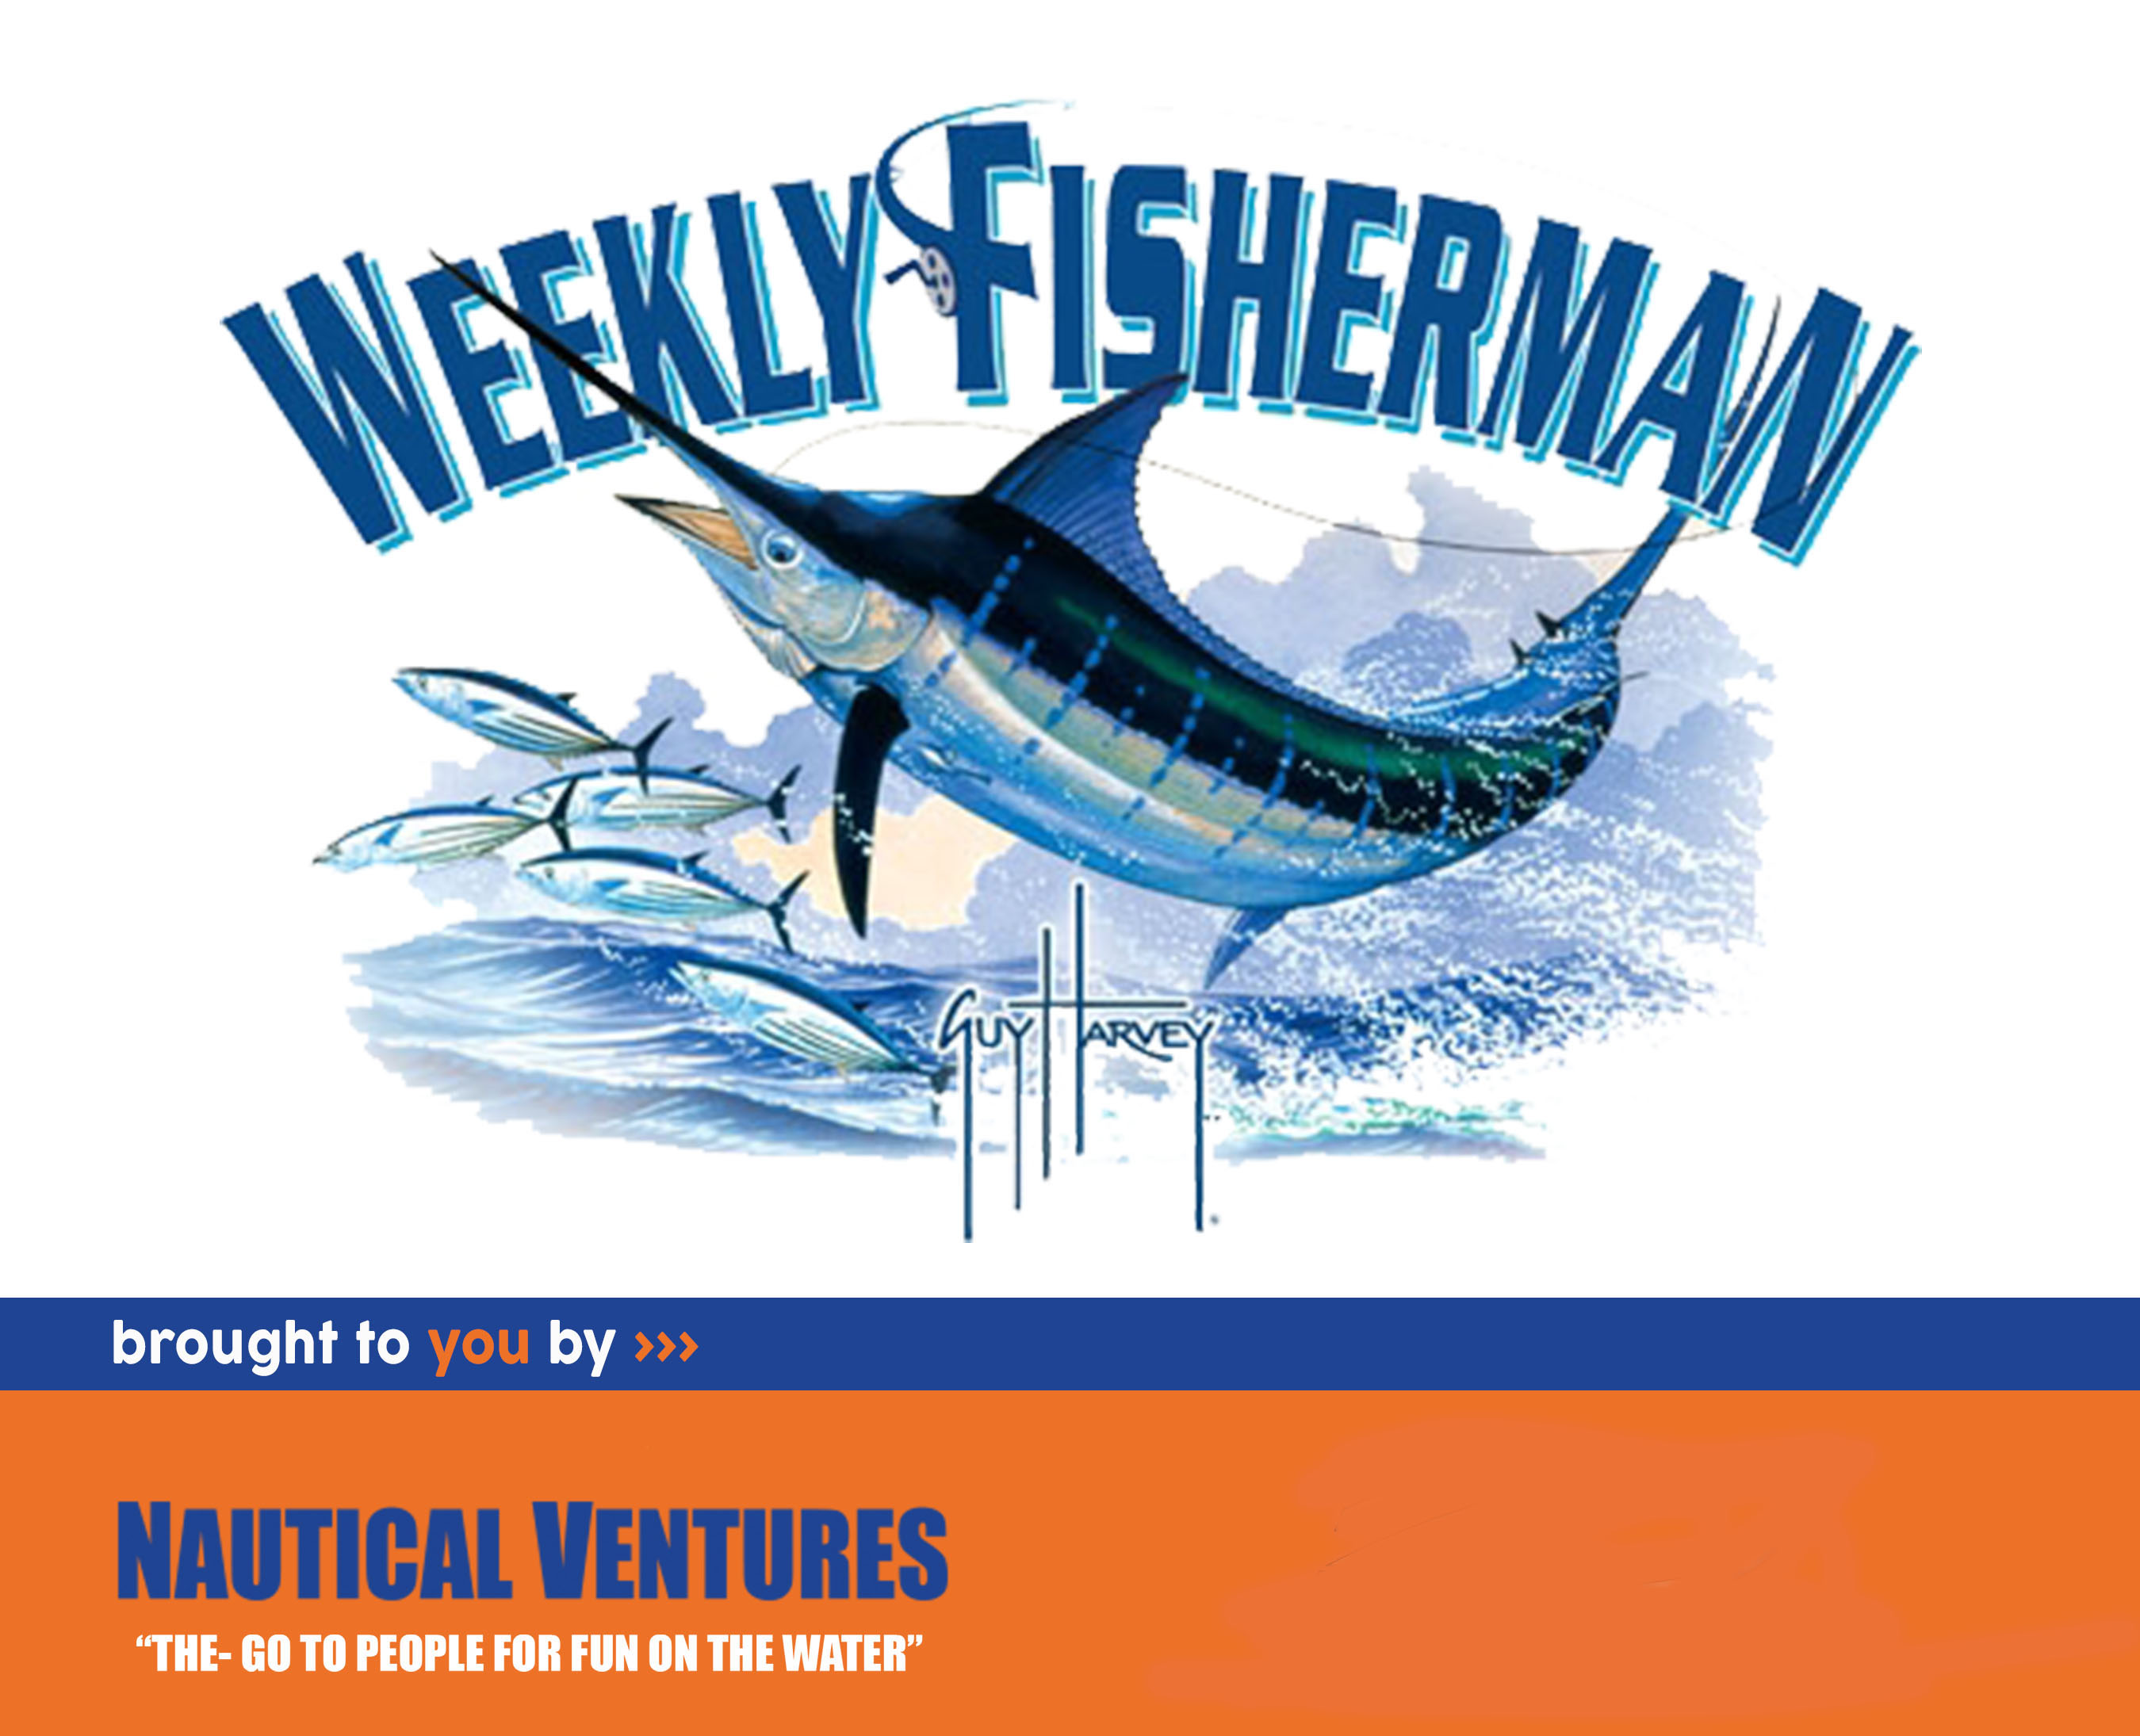 The Weekly Fisherman Show Podcast 05-14-16